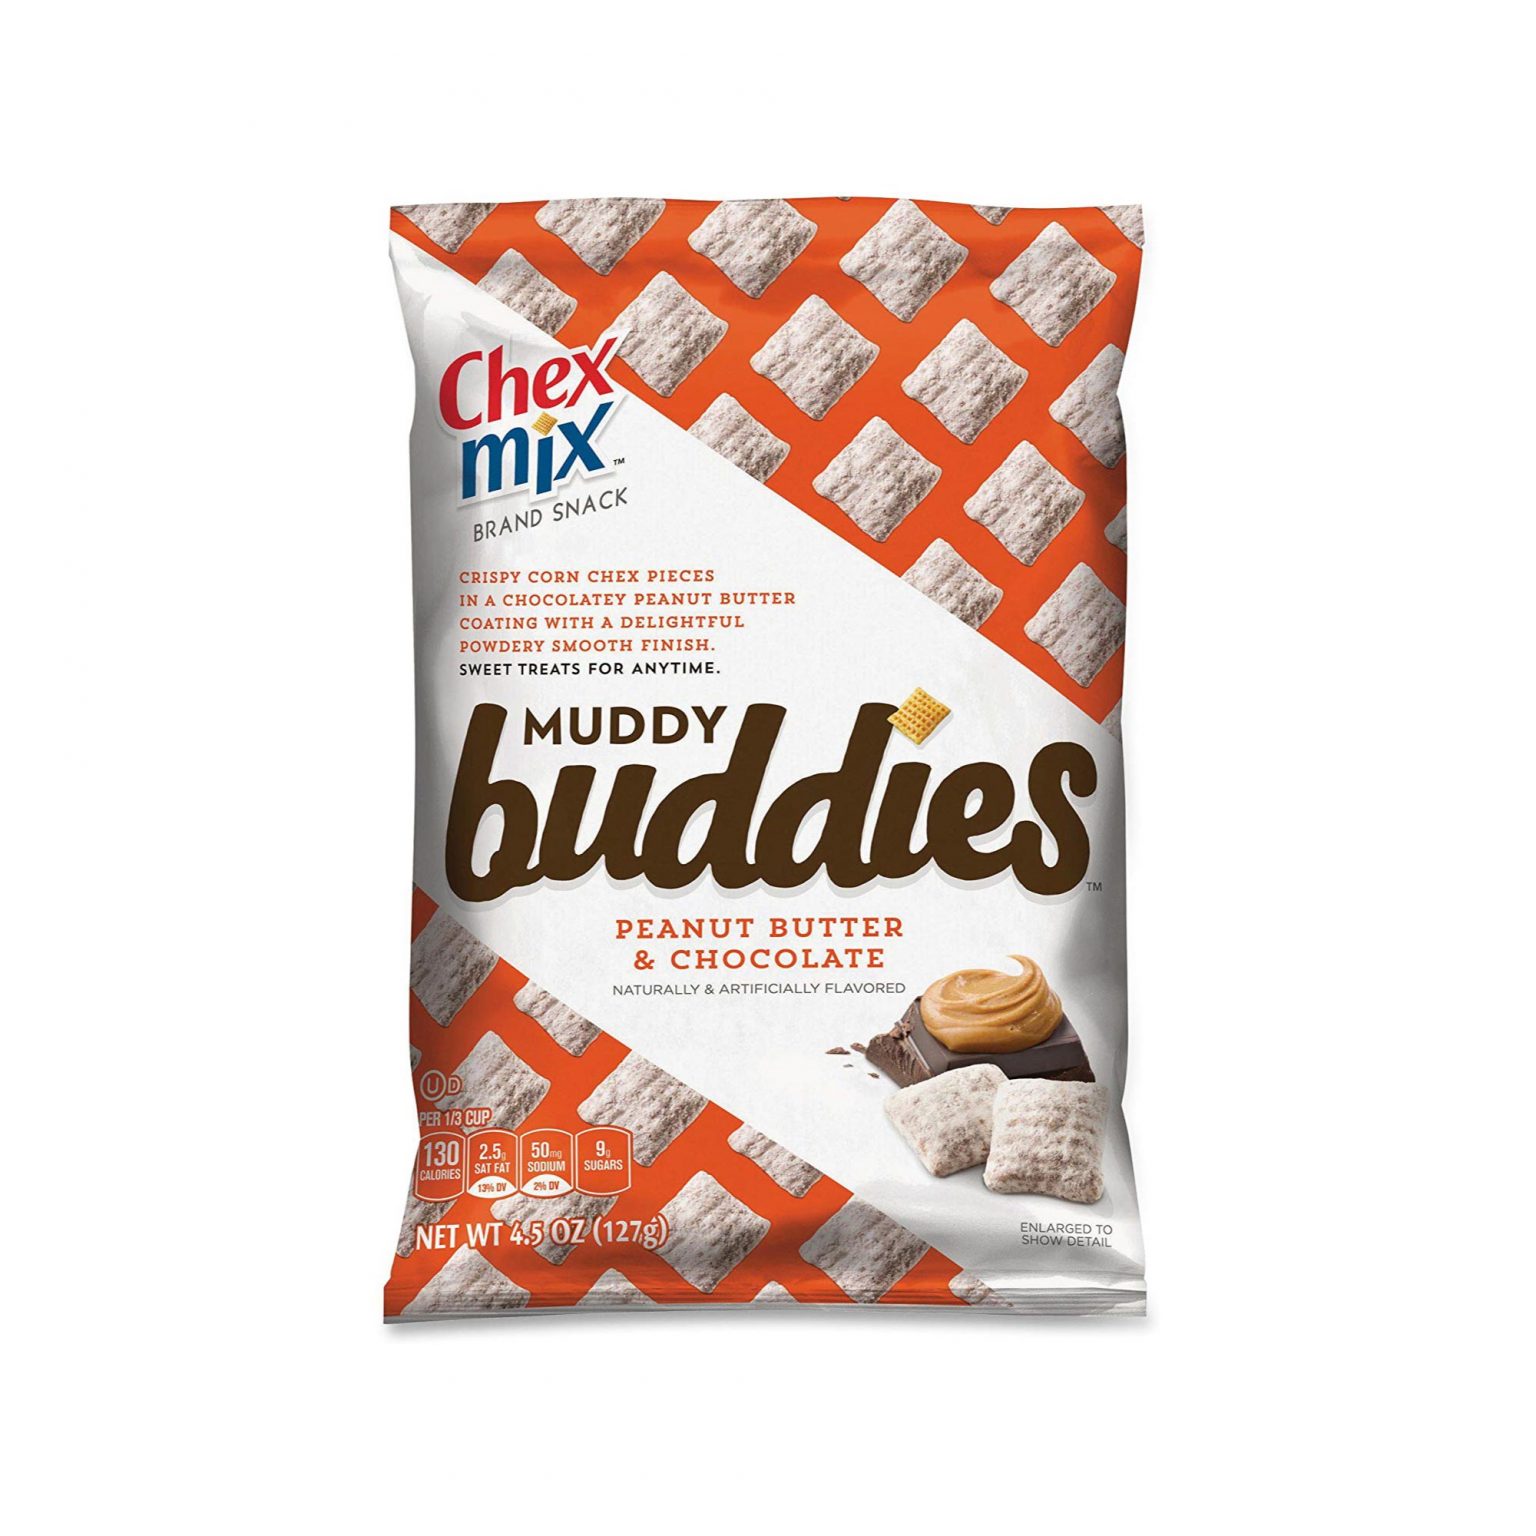 Chex Mix Muddy Buddies Peanut Butter And Chocolate 4 5oz 7ct Volt Candy